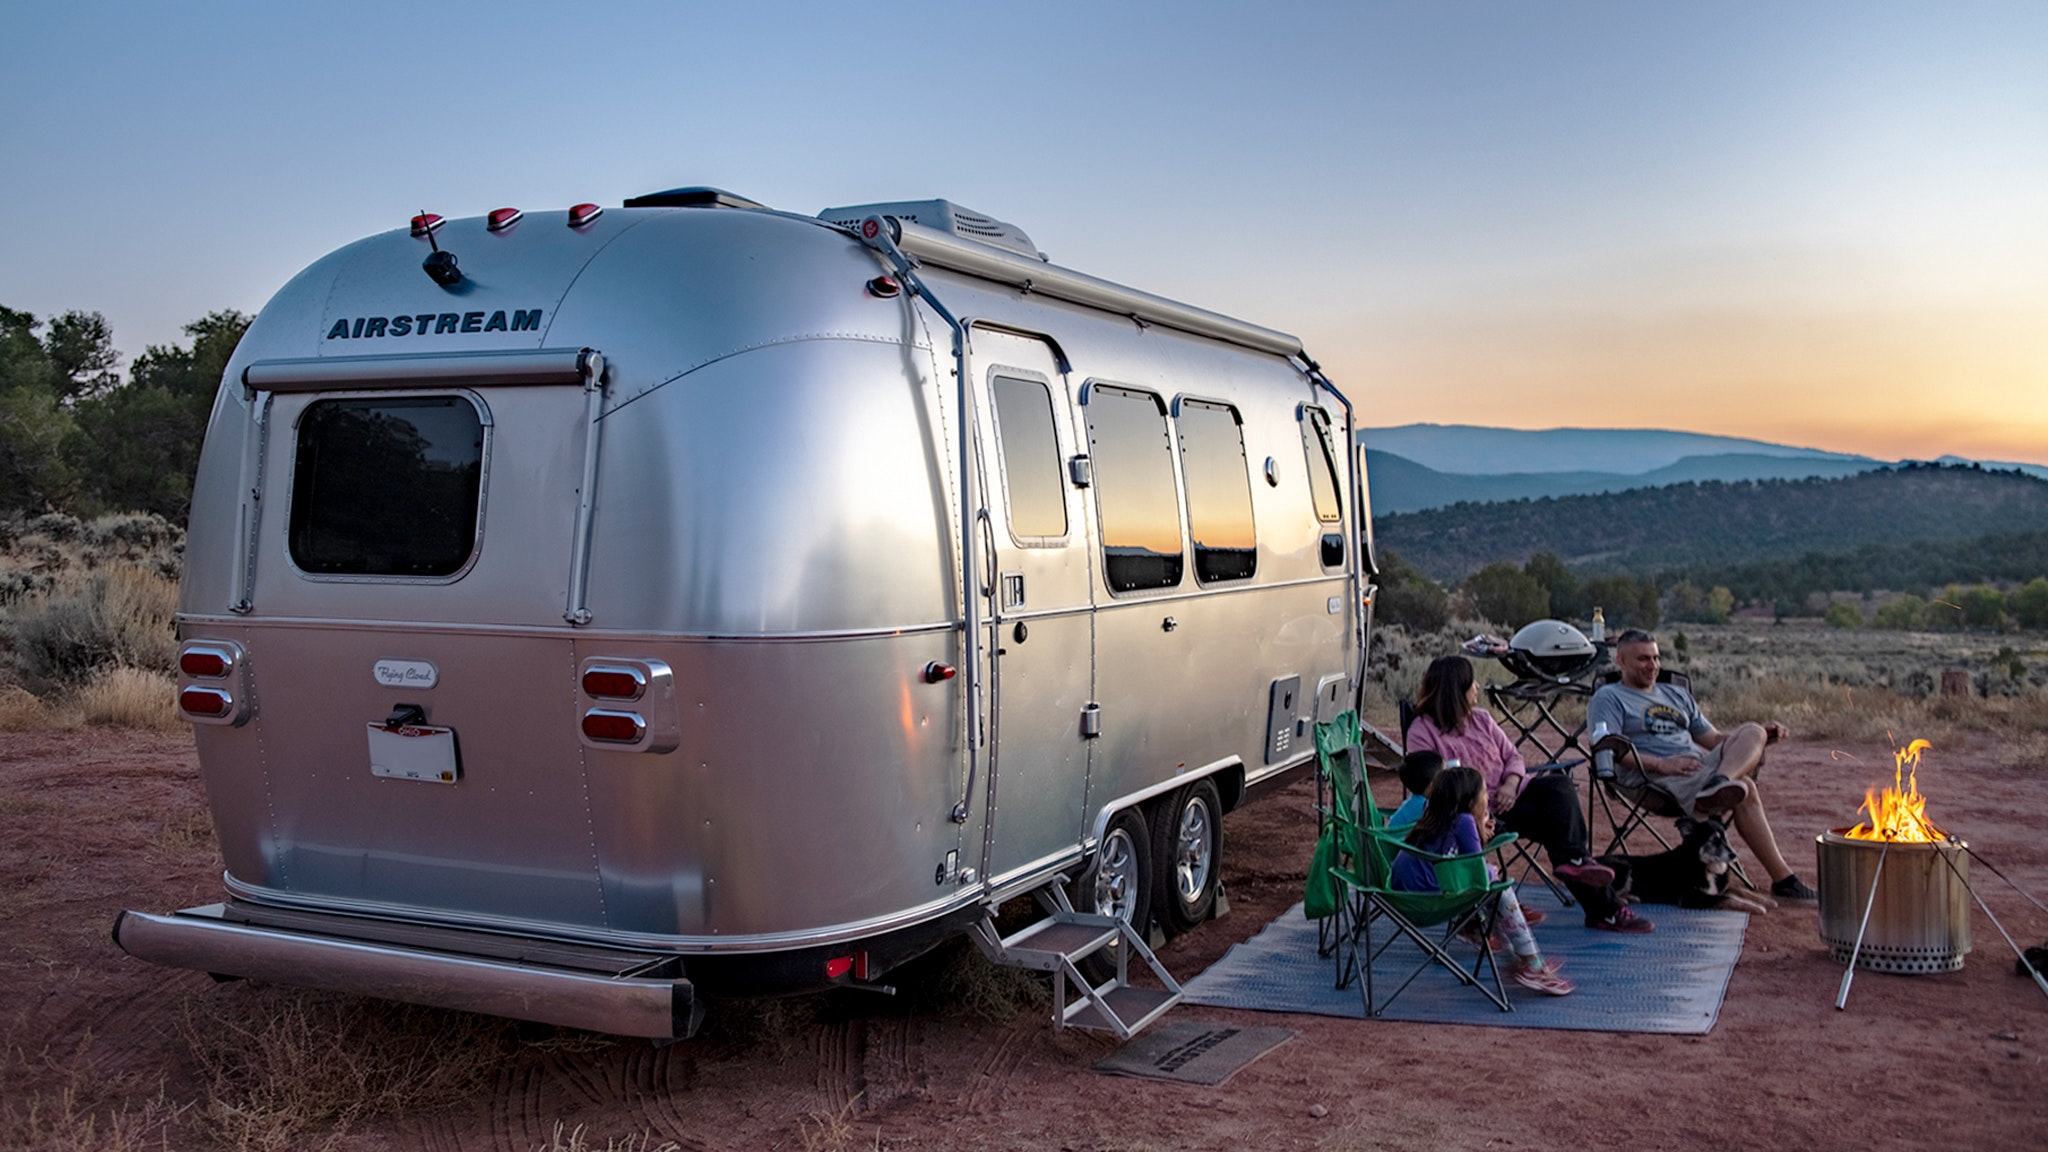 https://cdn.airstream.com/wp-content/uploads/2020/10/Airstream-Power-Plus-Flying-Cloud-Boondocking-Power-Upgrade-with-Lithium.jpg?auto=format&crop=edges&fit=crop